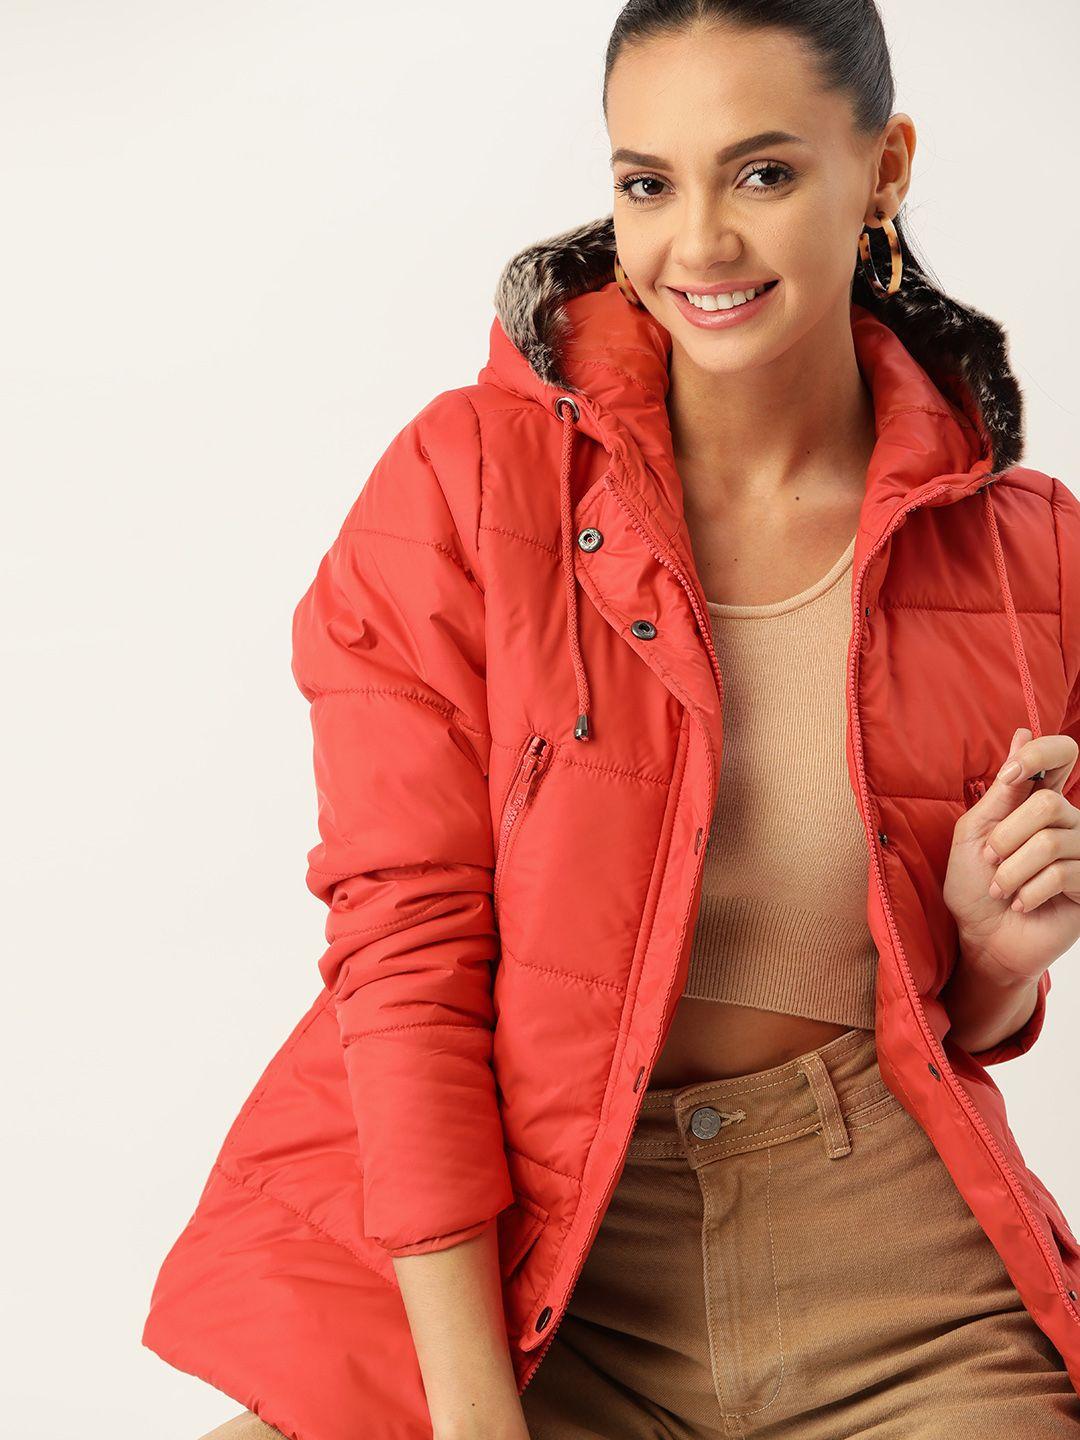 dressberry-women-coral-red-solid-hooded-parka-jacket